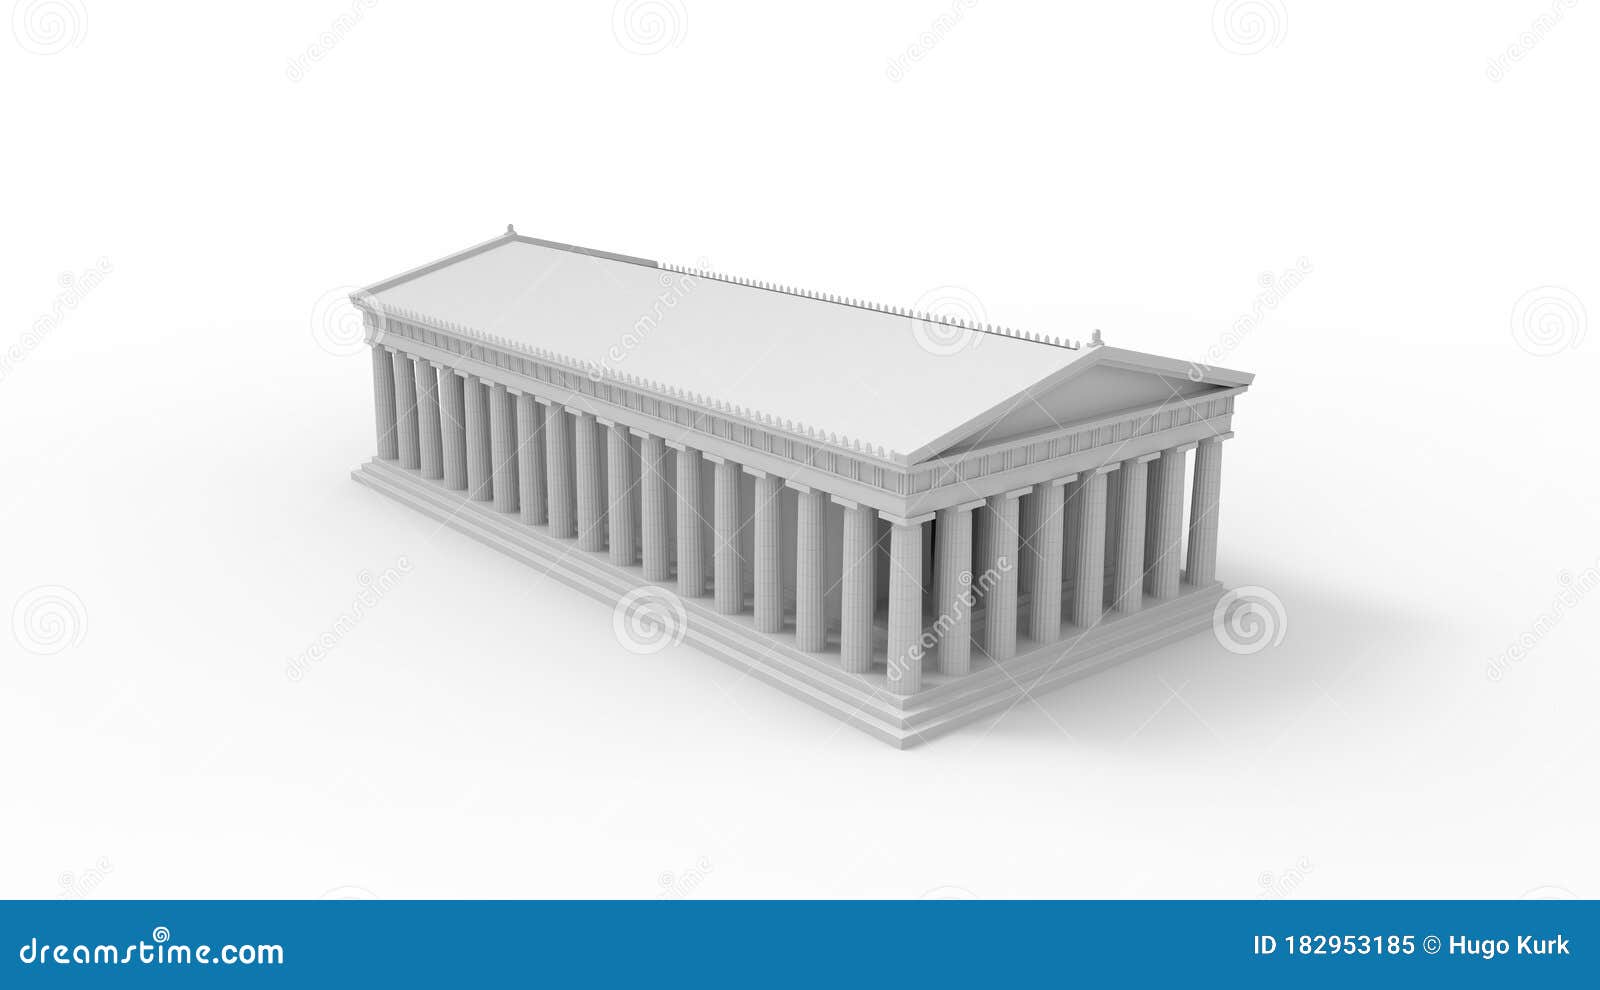 5,449 Mouseio Akropolis Images, Stock Photos, 3D objects